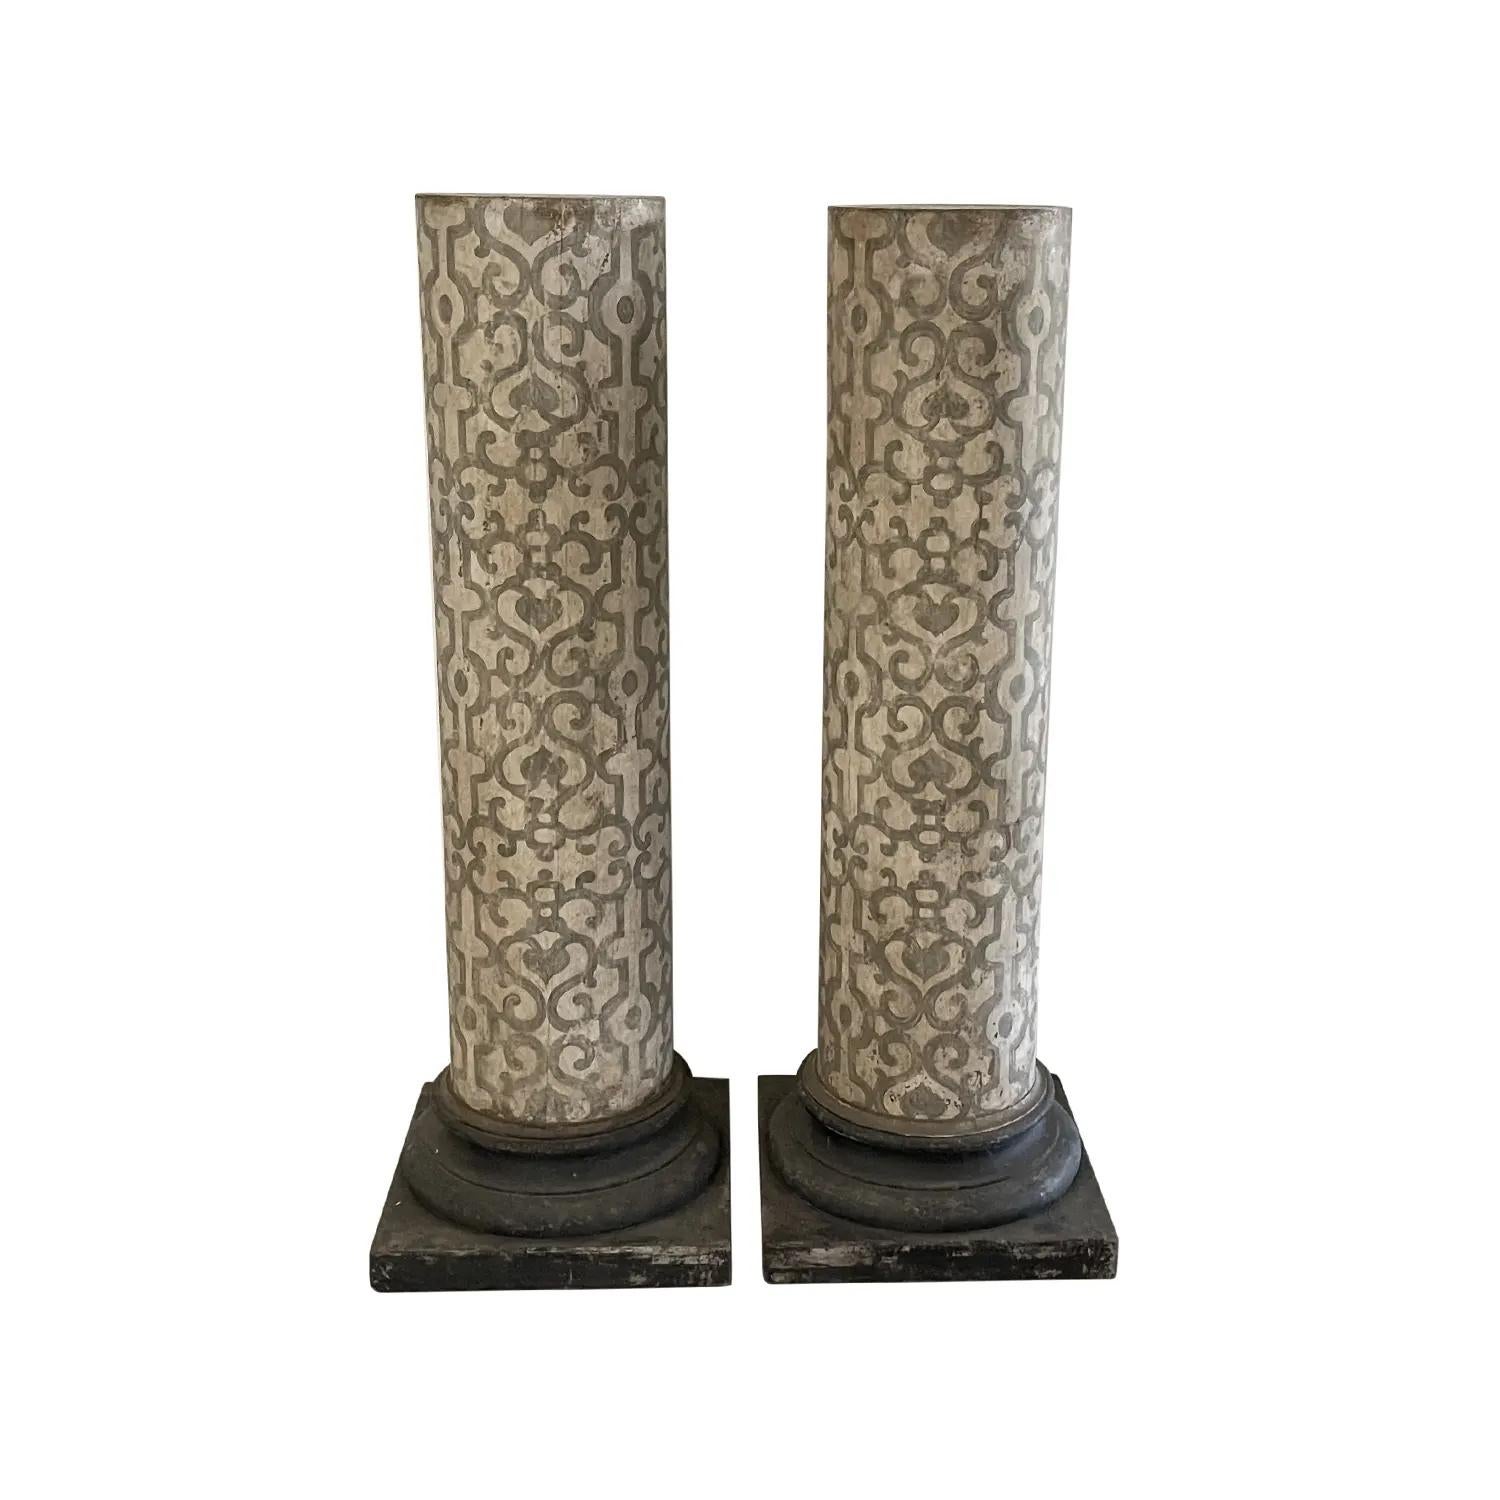 Early 19th century, an antique Italian pair of patinated column pedestals Arte Povera, made of hand crafted Pinewood with a square base in legno laccato hand painted with a continuous geometrical light Tuscan pattern light and dark grey. The top is